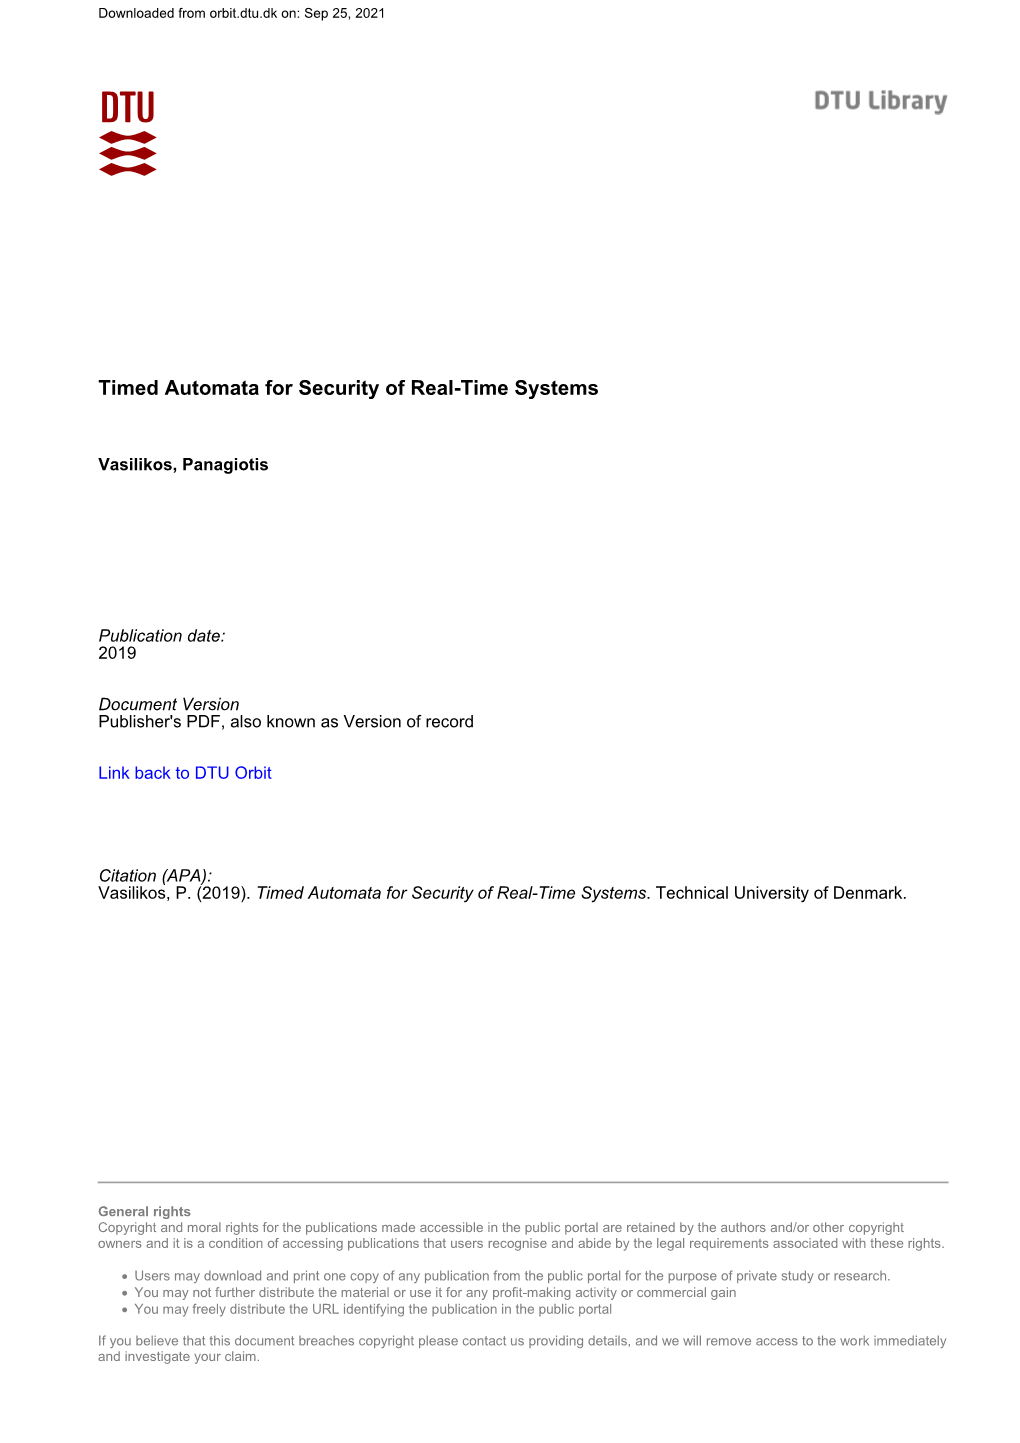 Timed Automata for Security of Real-Time Systems